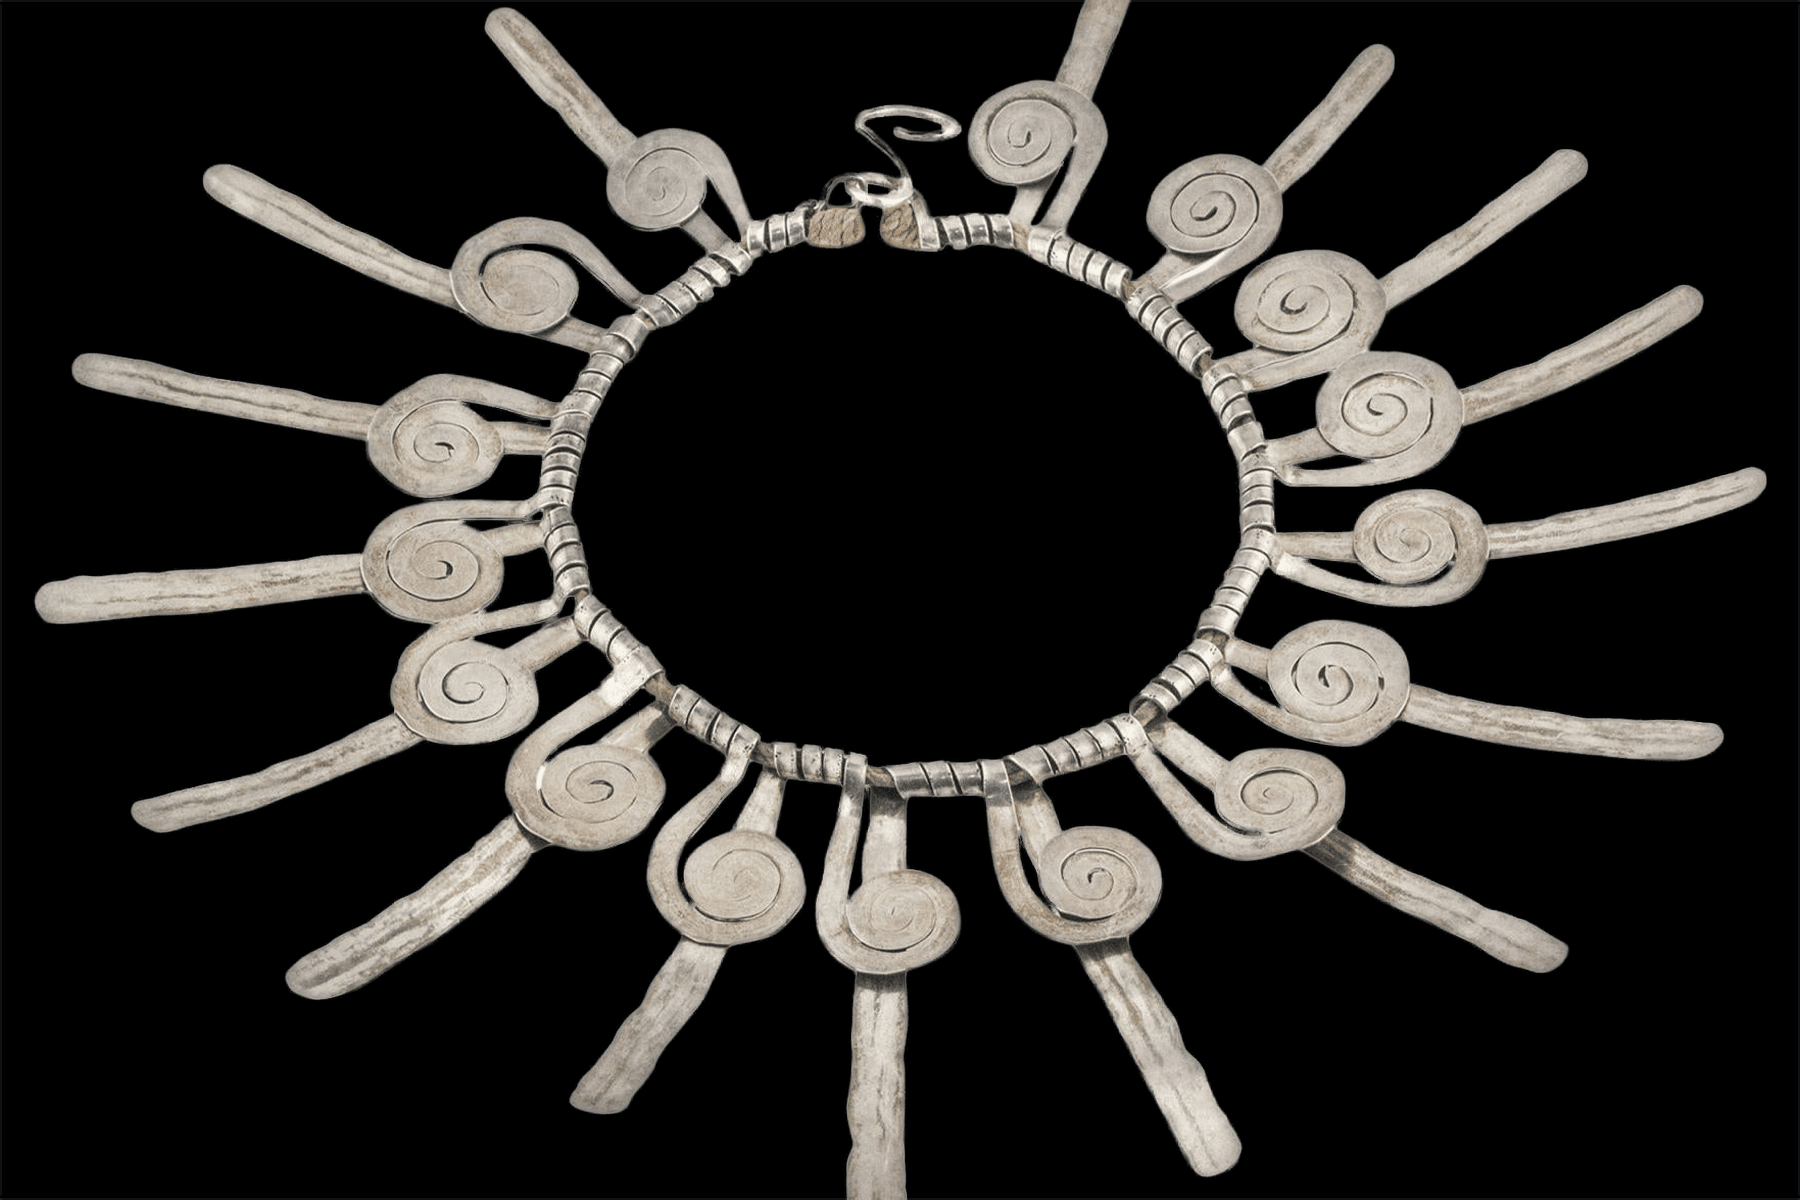 Renowned for His Mobiles, Alexander Calder Was Also Adept at Crafting Modernist Jewelry